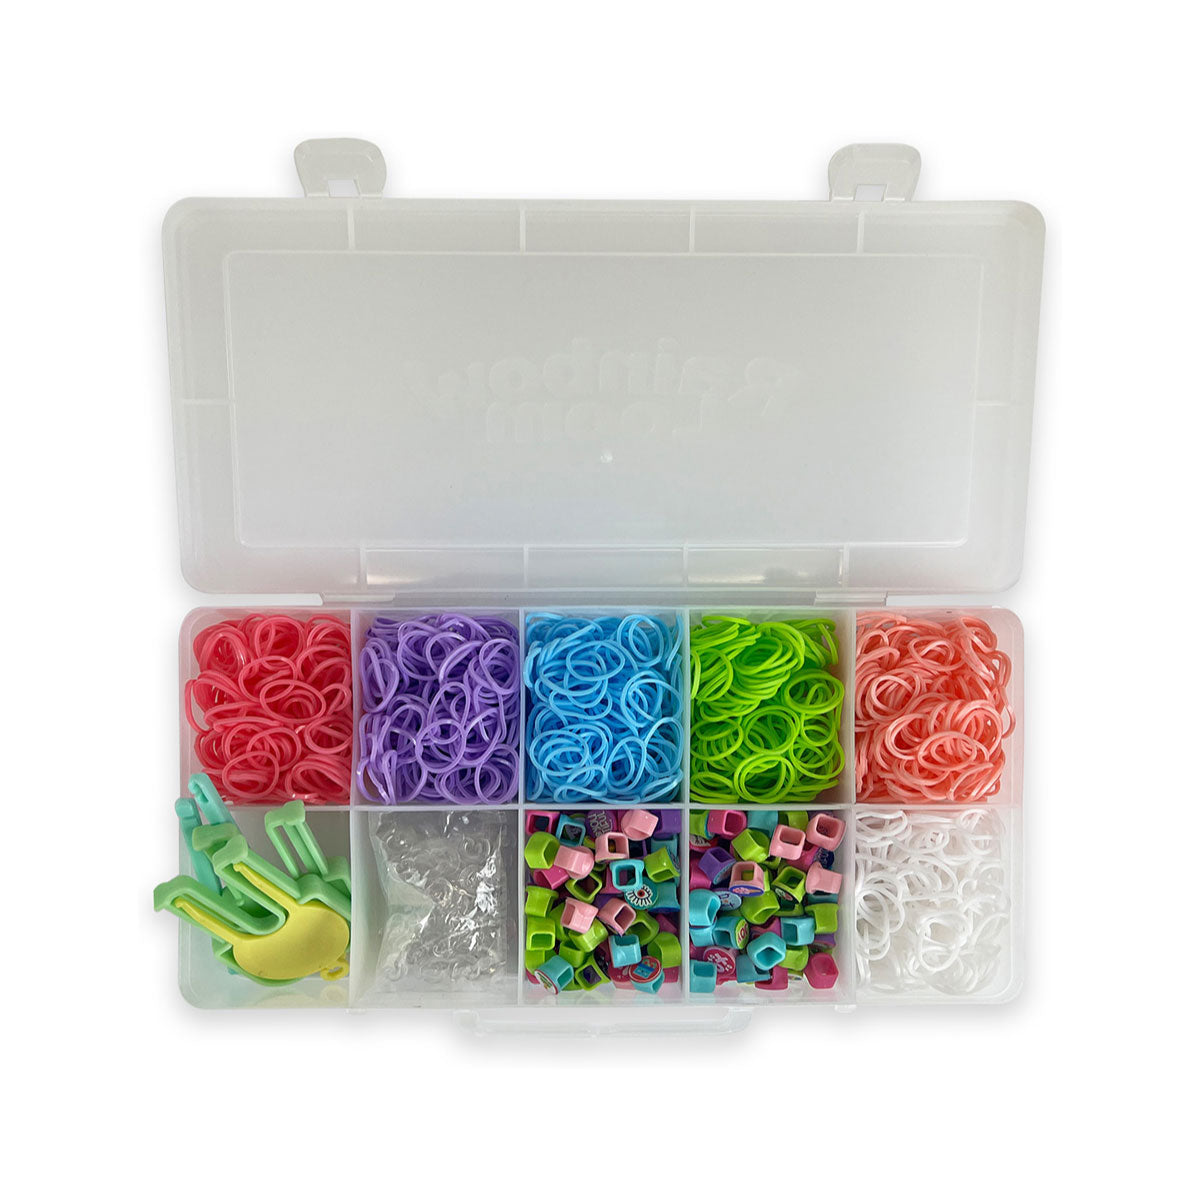  Rainbow Loom® Large Organizer Case with Buildable